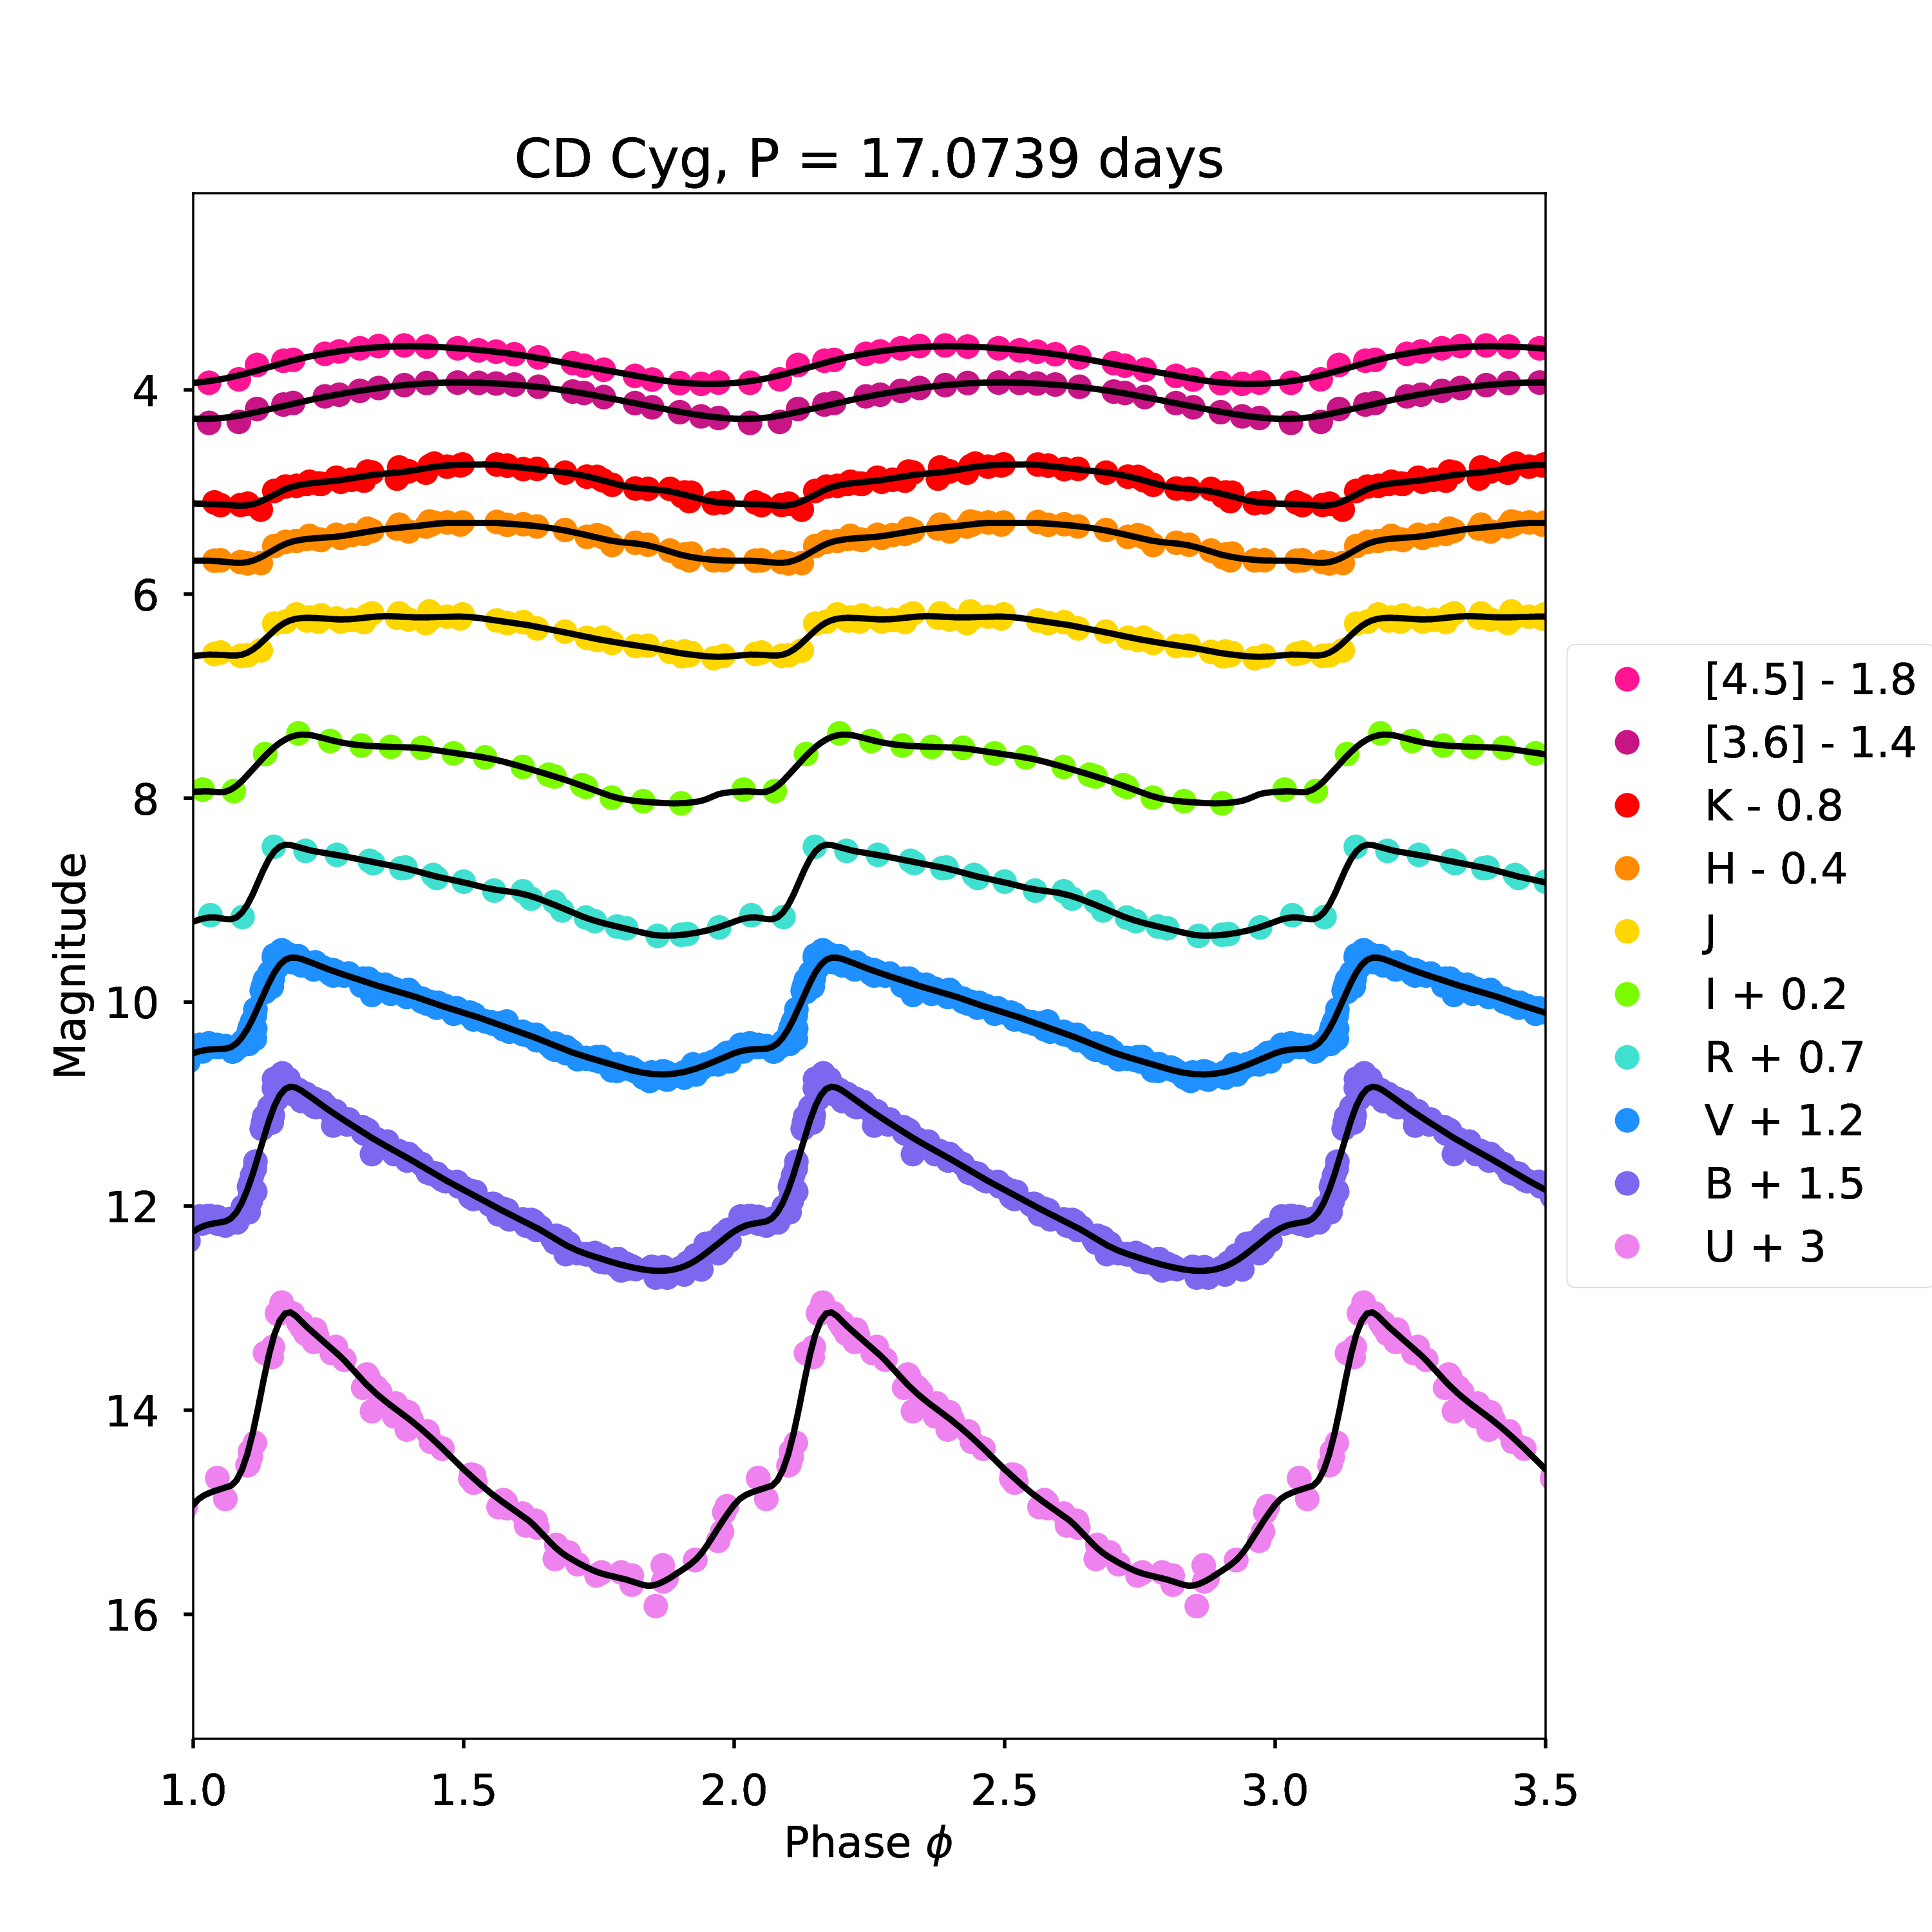 Multiwavelength light curves for Milky Way Cepheid CD Cyg. The light curves become more sinusoidal and smaller in amplitude as you move from blue to red wavelengths.